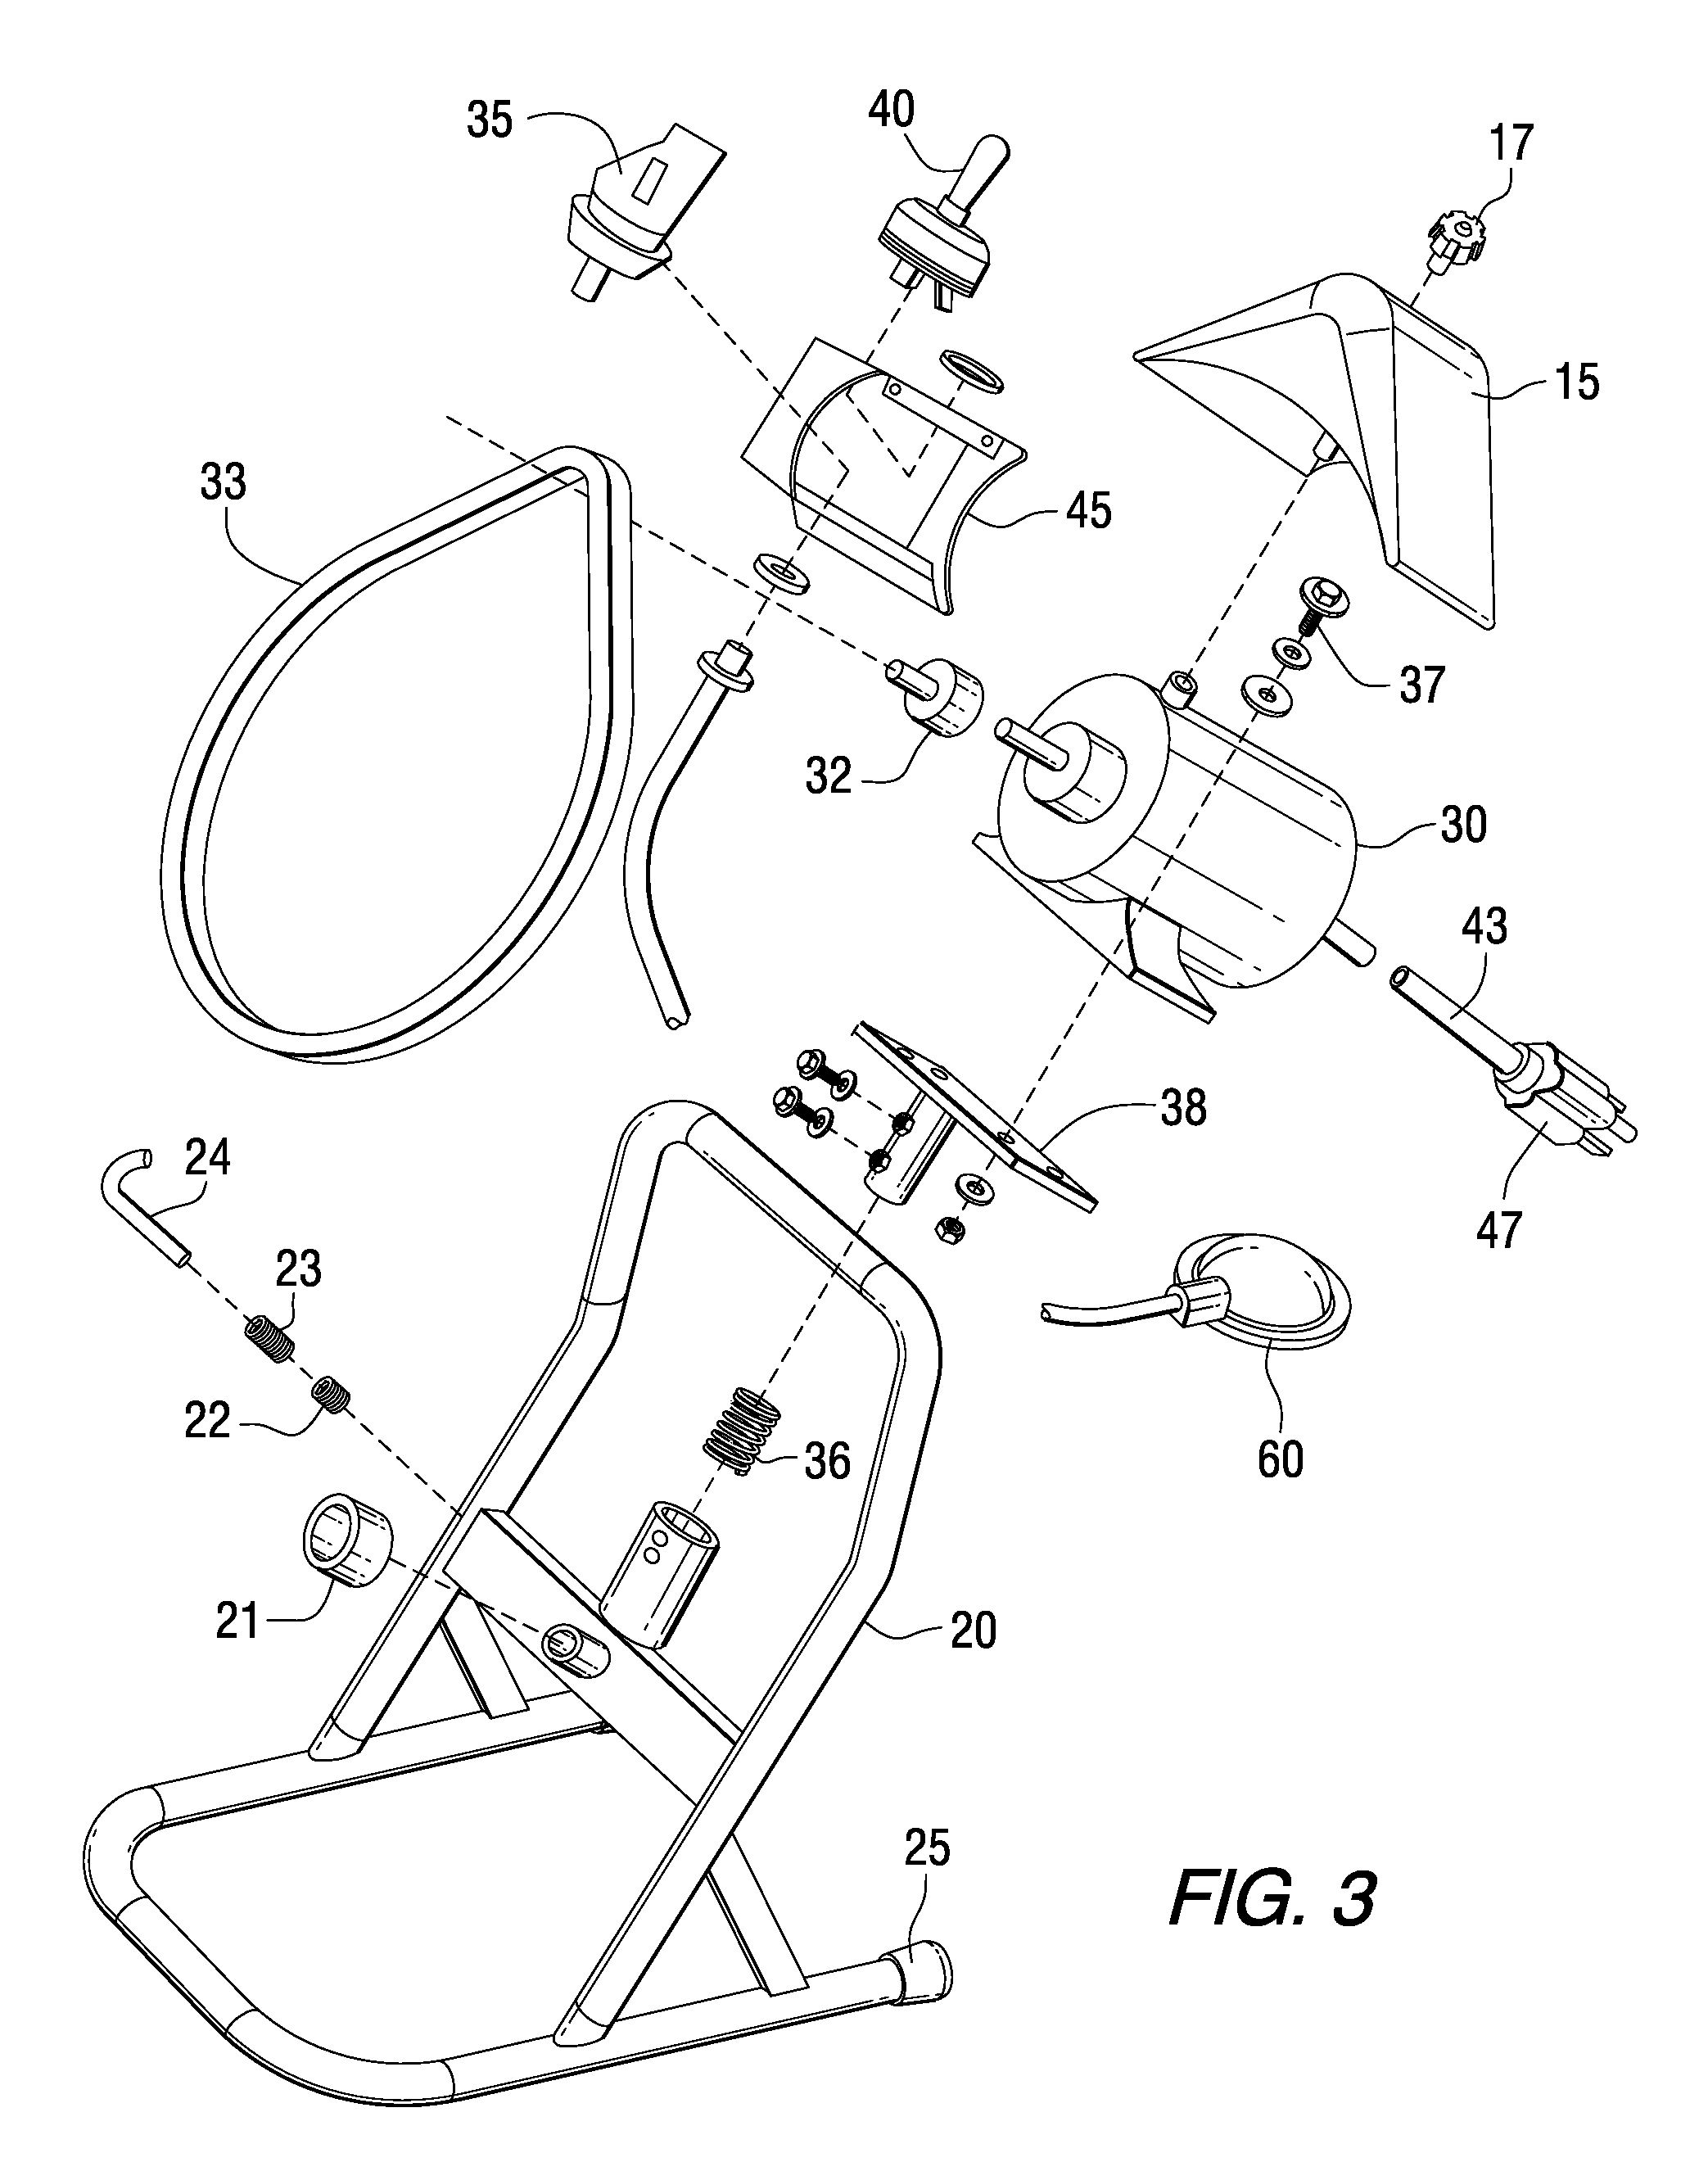 Drain cleaning apparatus with restricted reverse function